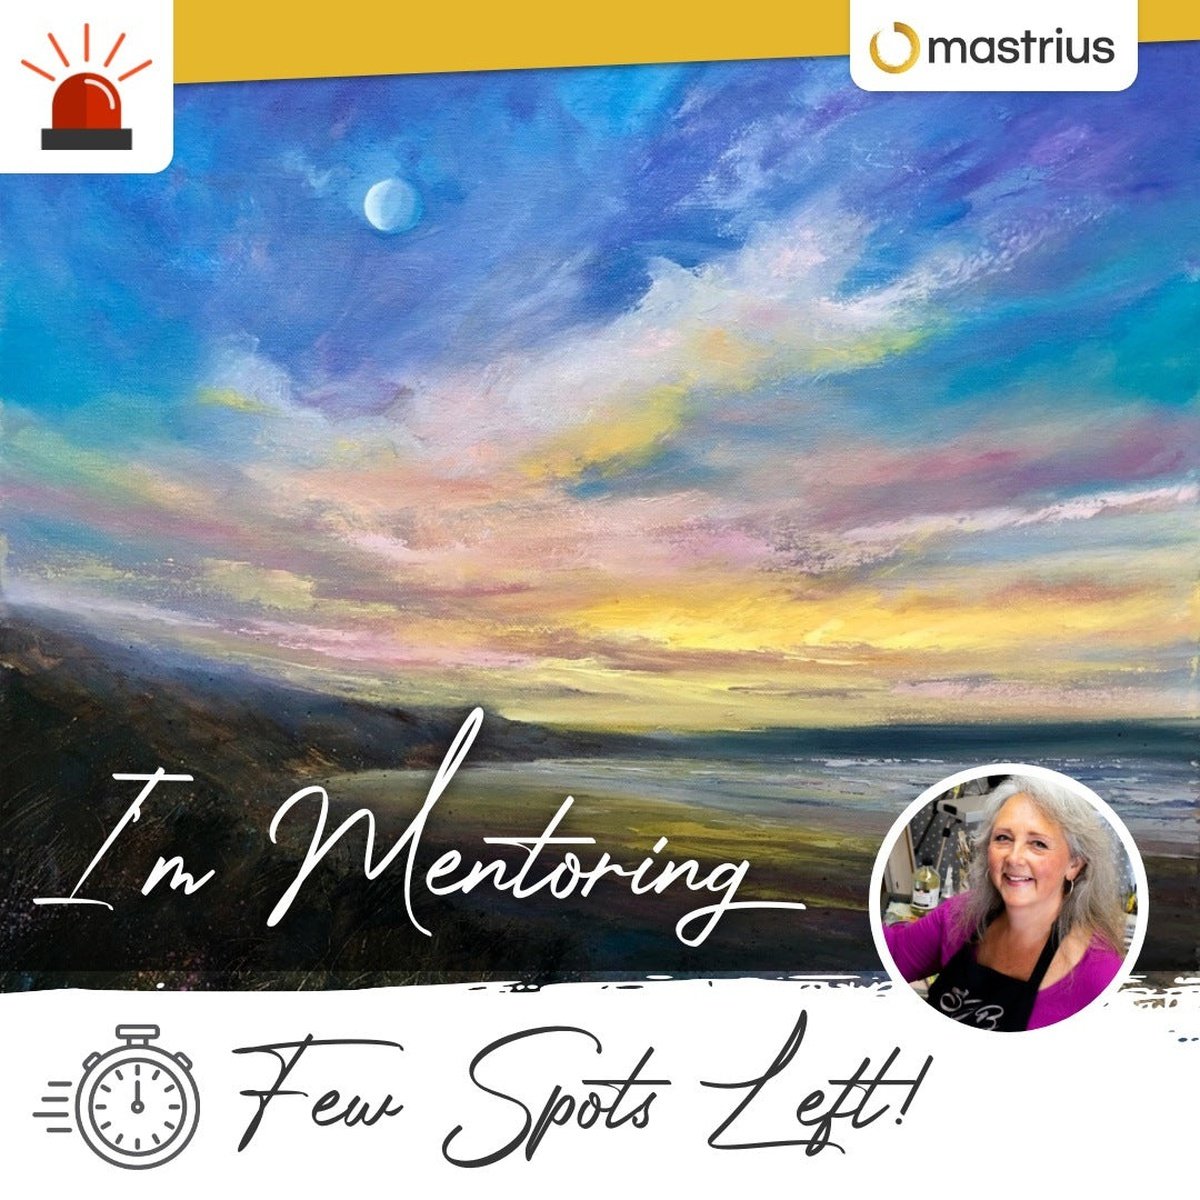 Let me help you grow creatively - join my Mastrius Mentor Group!